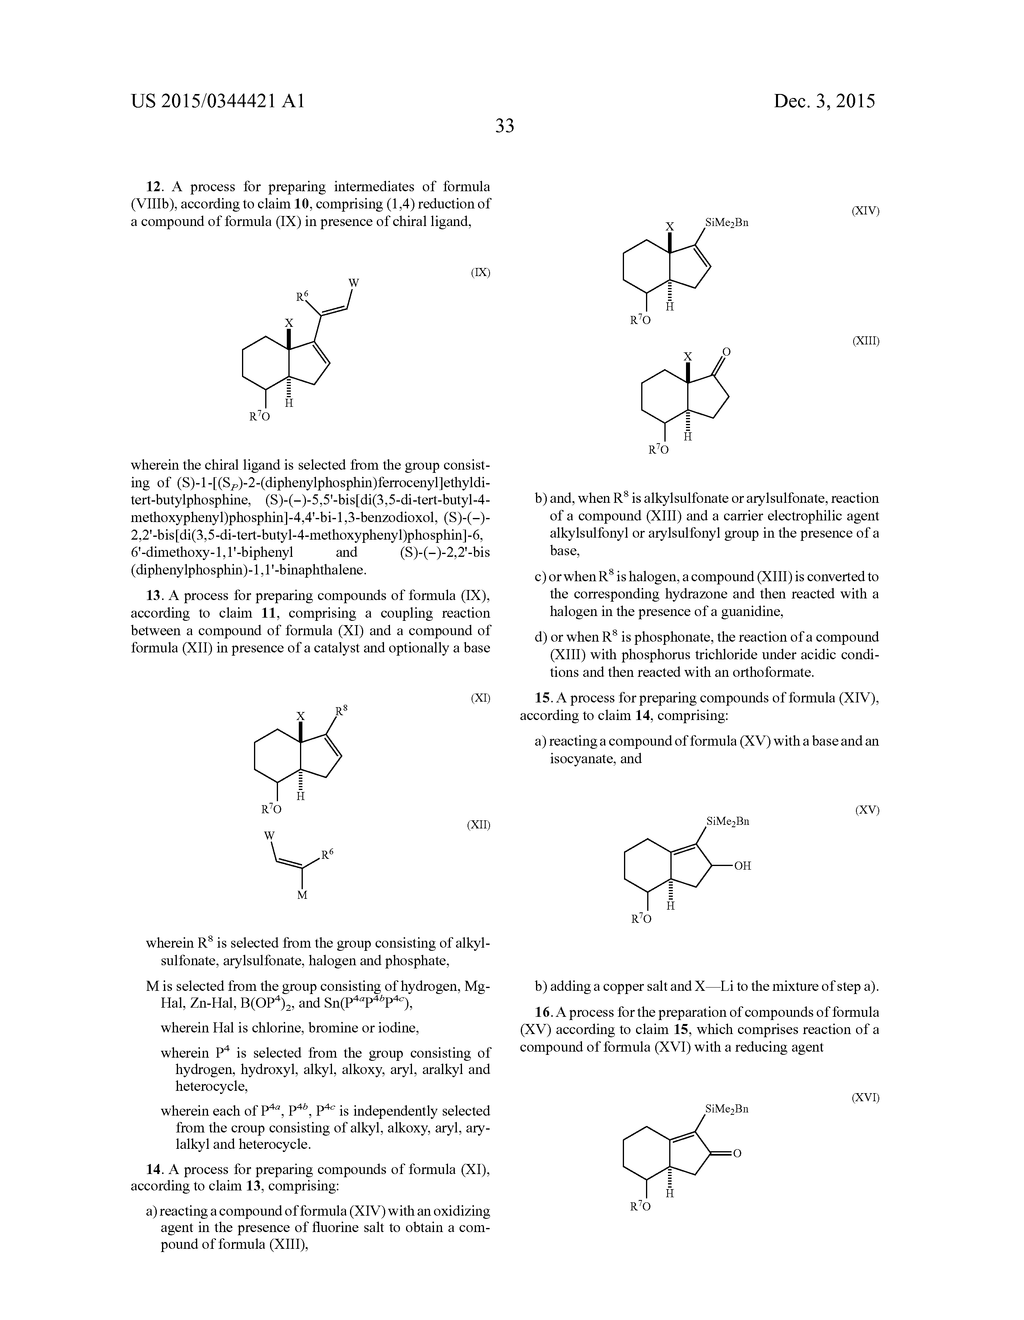 Versatile and Functionalised Intermediates for the Synthesis of Vitamin D     and Novel Vitamin D Derivatives - diagram, schematic, and image 34